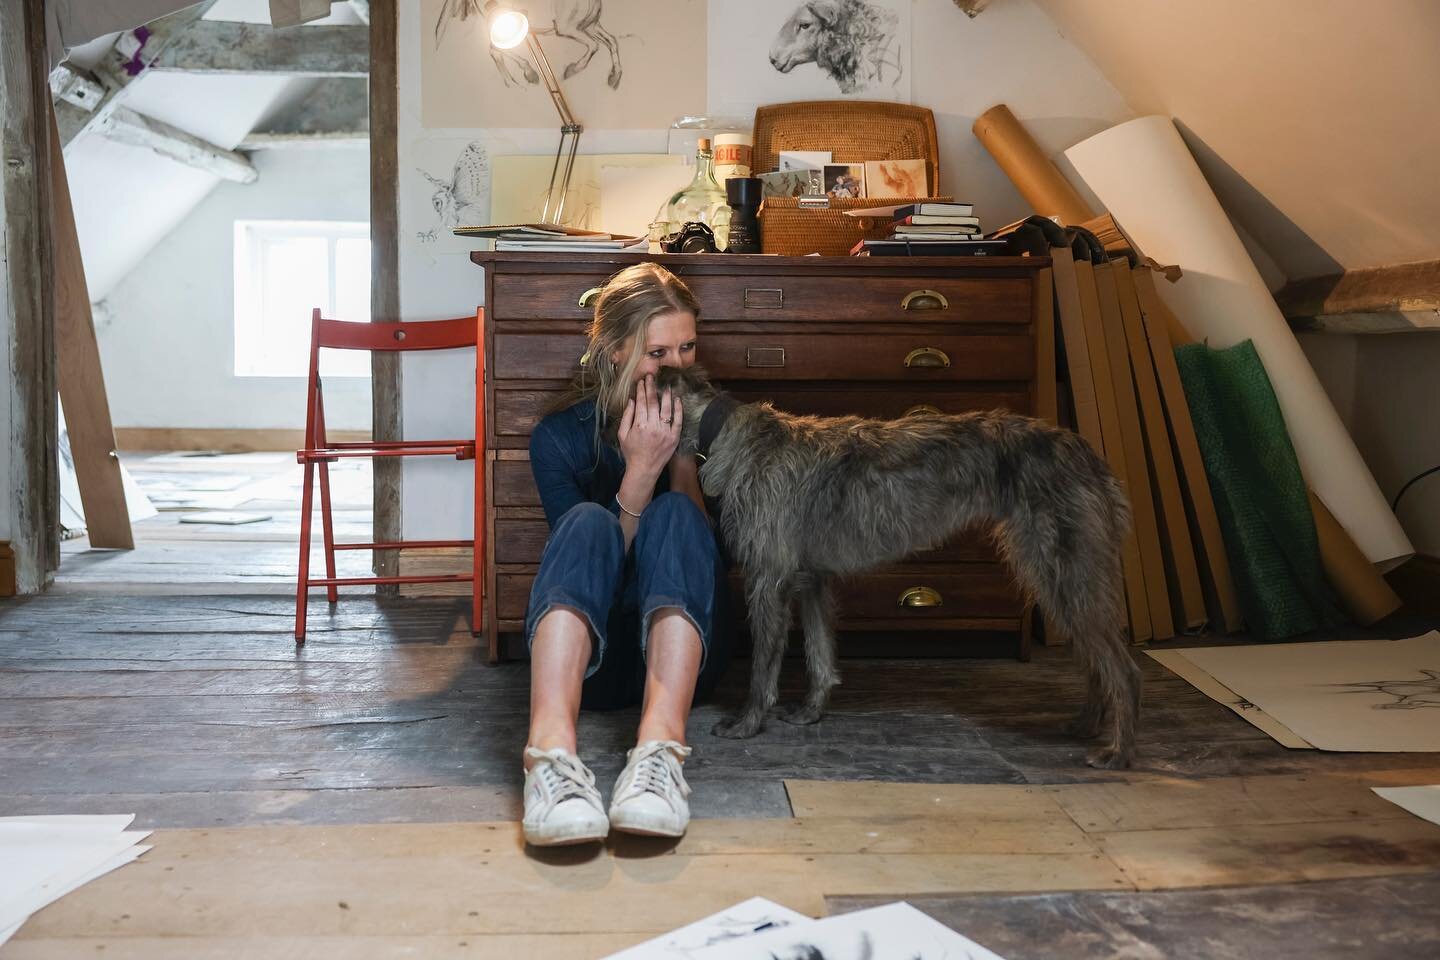 Fig stealing the show, recent studio shots for my new website by the wonderful @lids_harper @sophie_jackson_studios more details soon.... #studiodog #artistsinwales #photography #contemporarydrawing #lurcher #hayonwye #wales #wildlifeartist